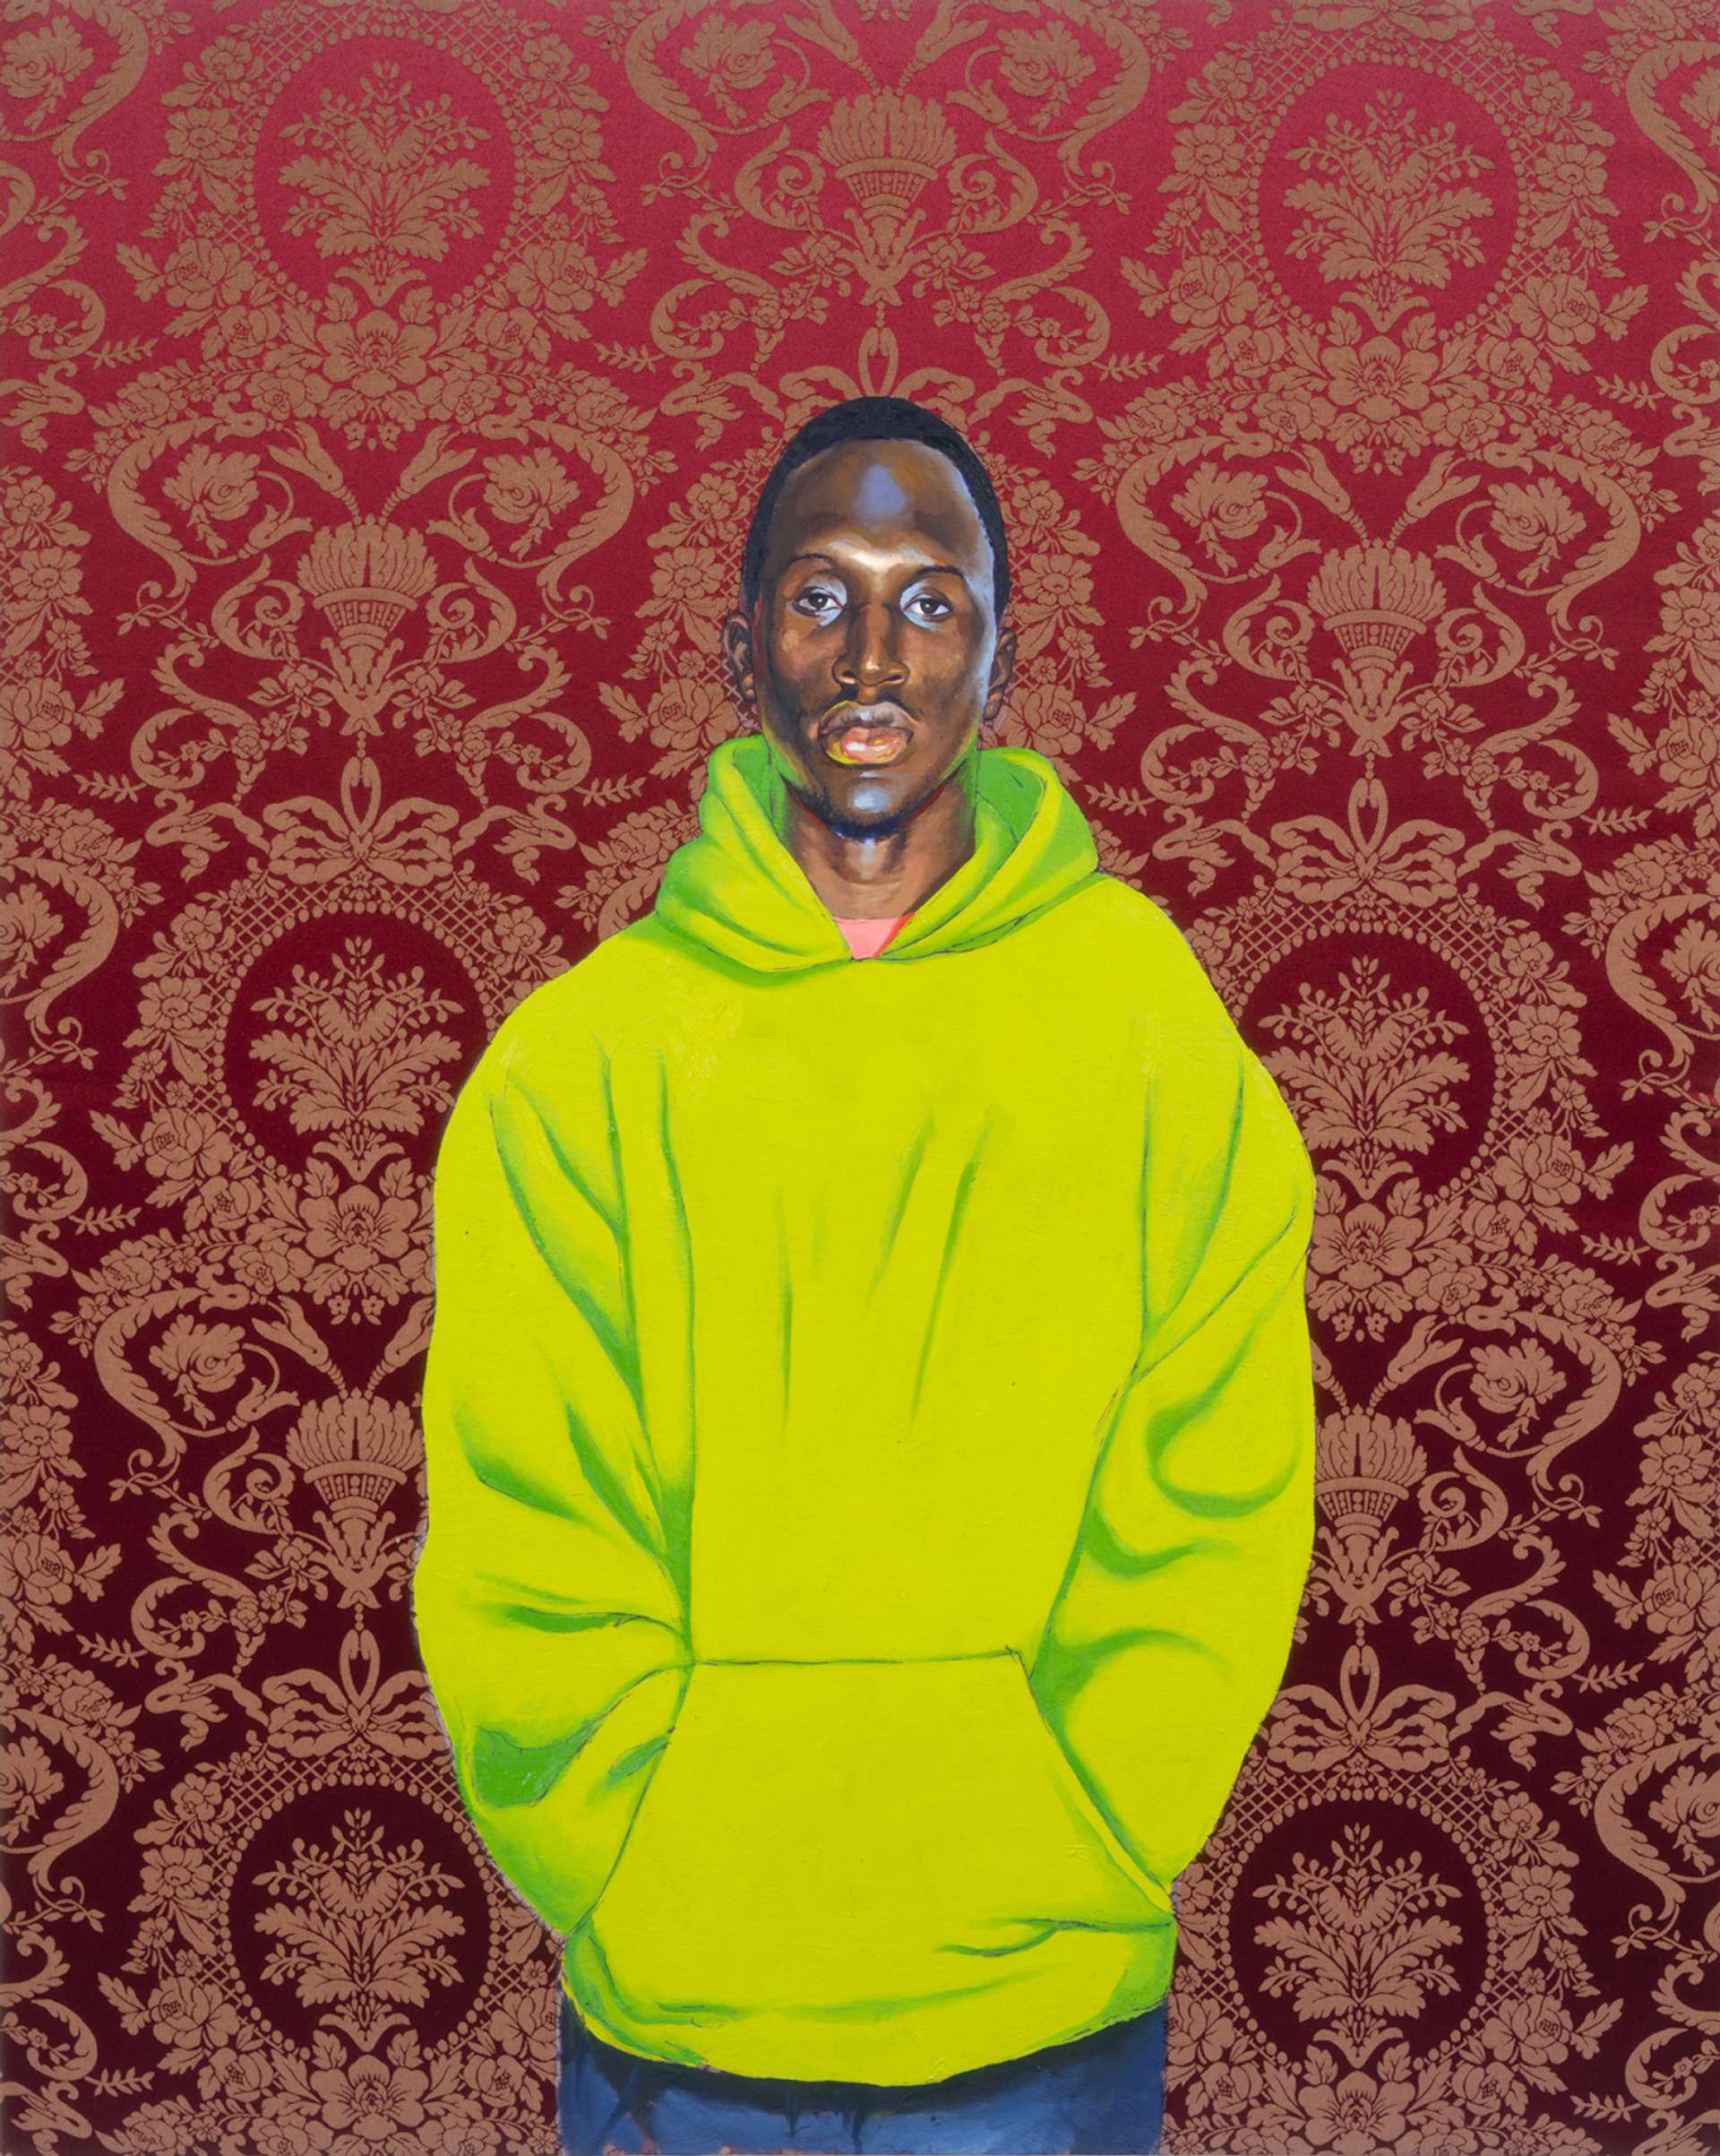 A young man looks directly at the viewer; he wears a lime green hoodie and has his hands in his pockets. The brown wallpaper behind him is adorned with an intricate, regal pattern.